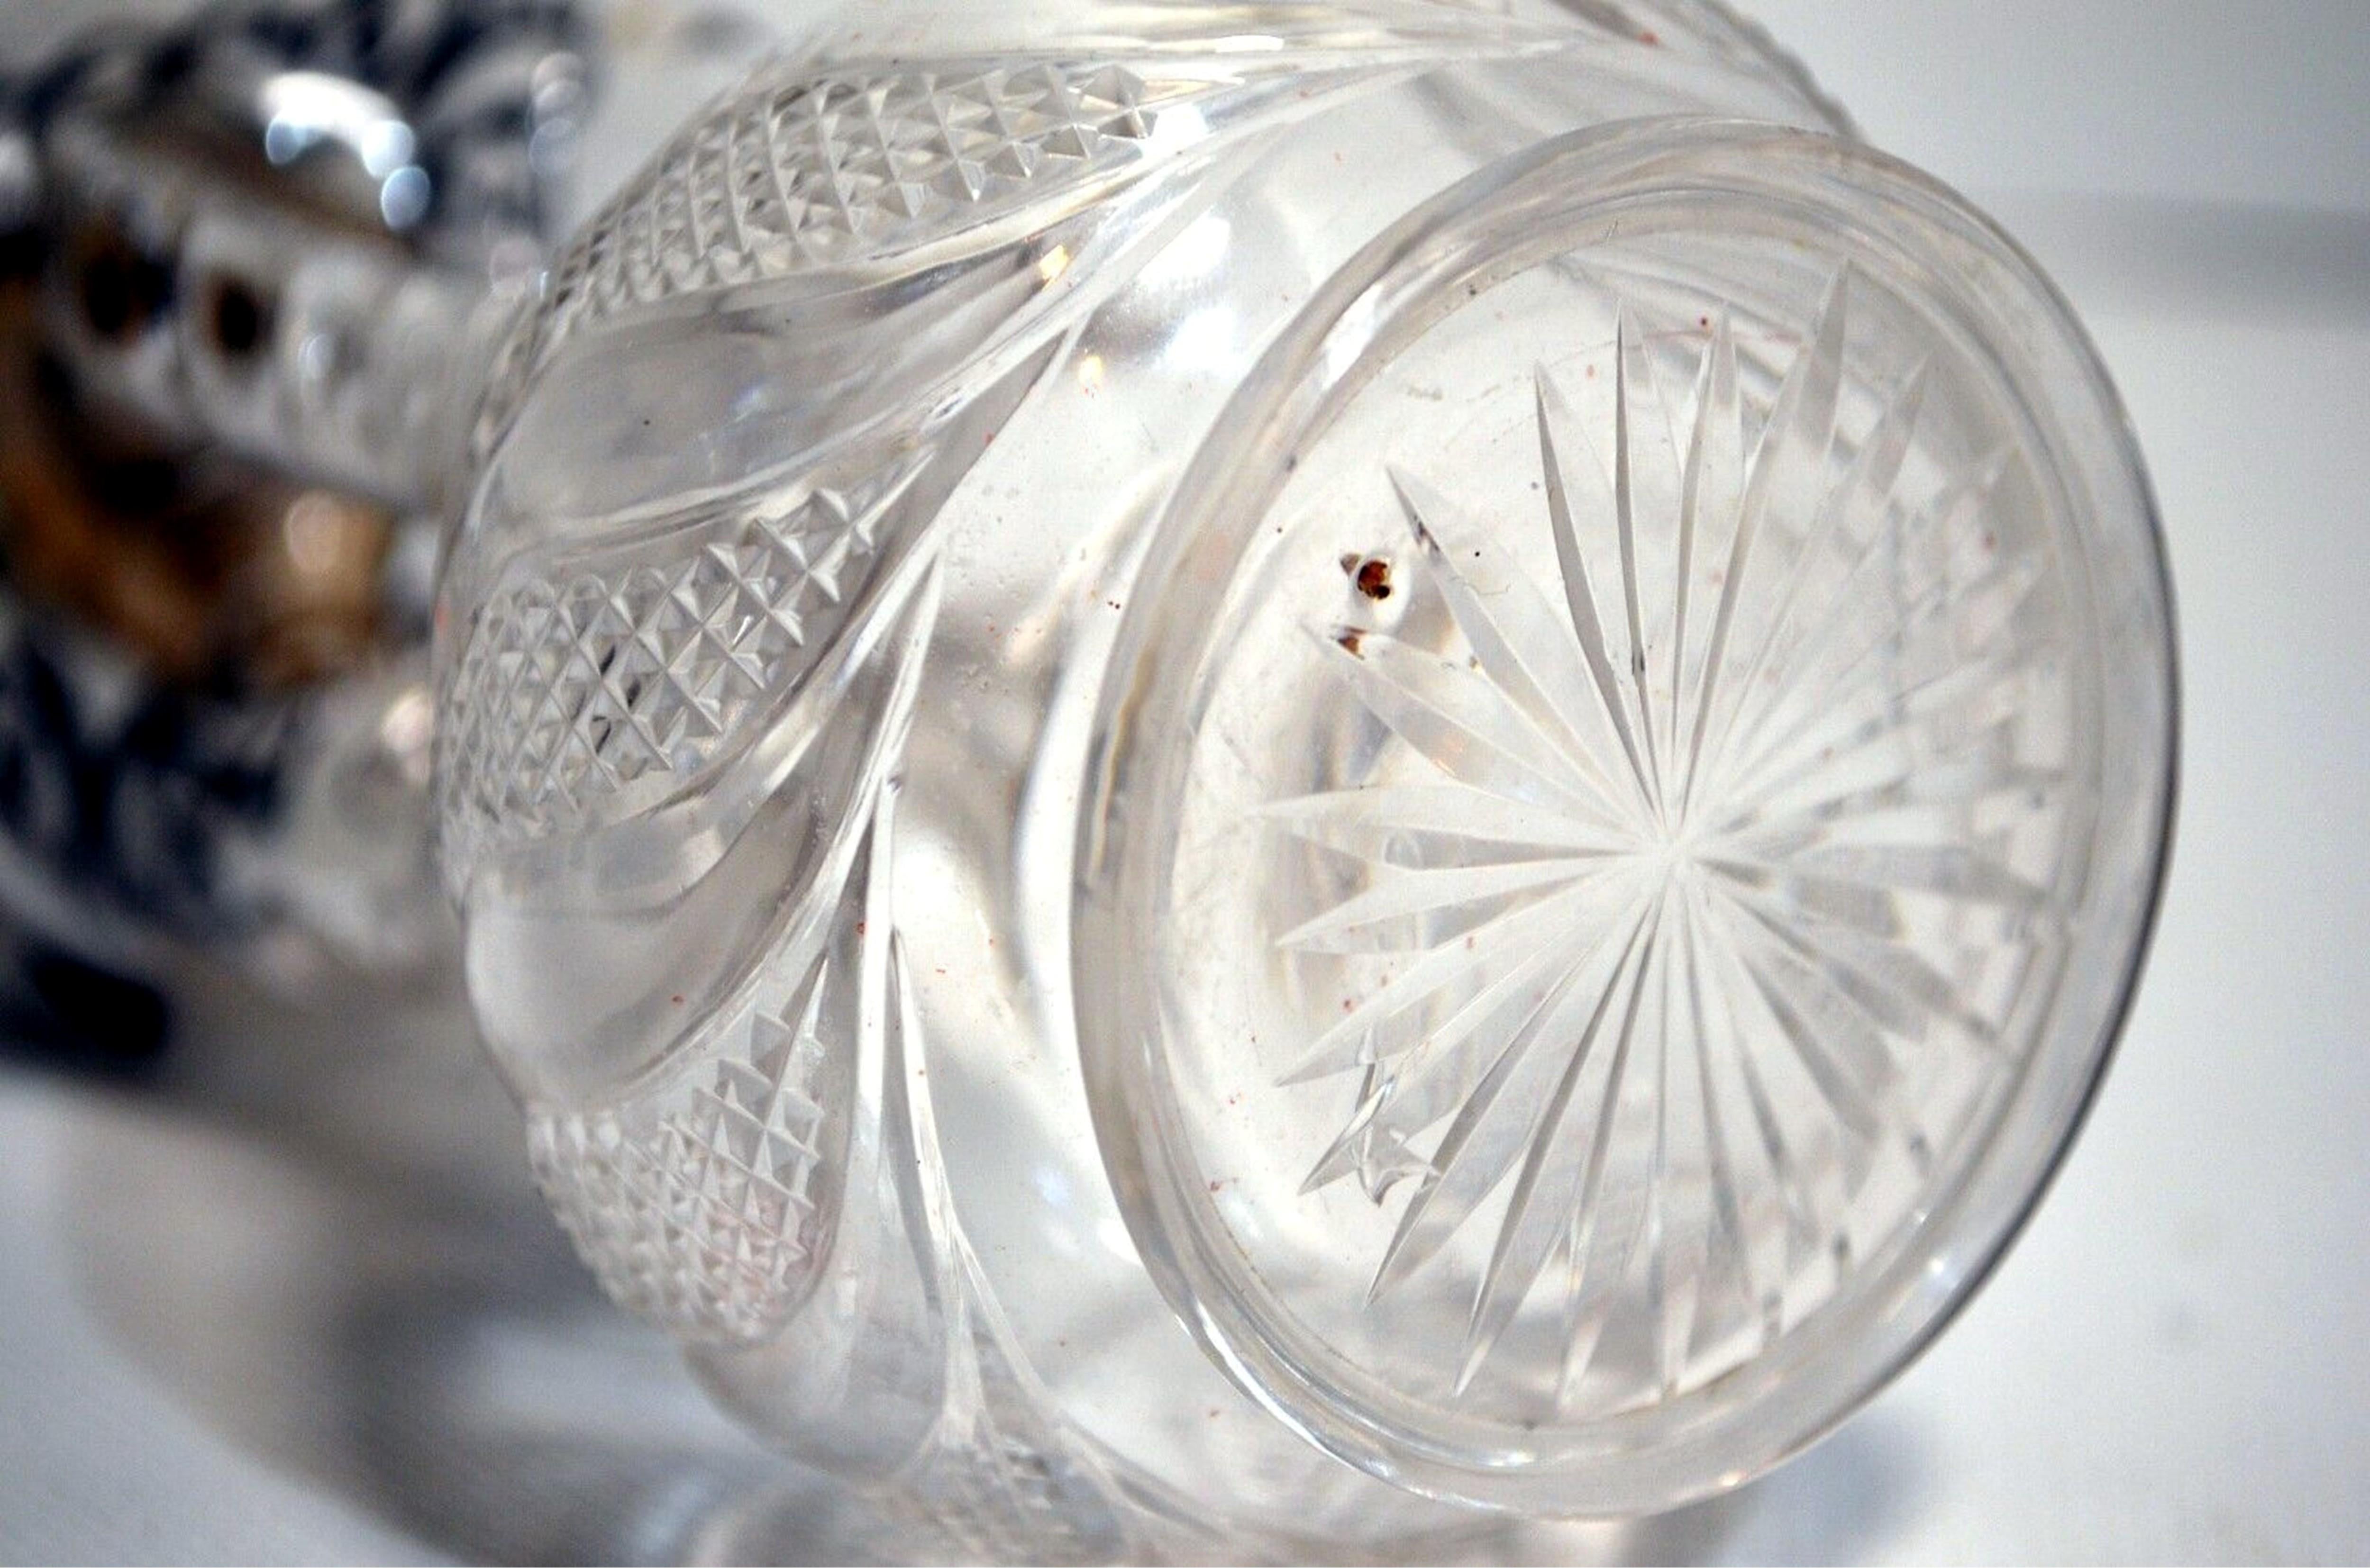 Victorian glug glug decanter bottle in cut crystal and sterling silver For Sale 4